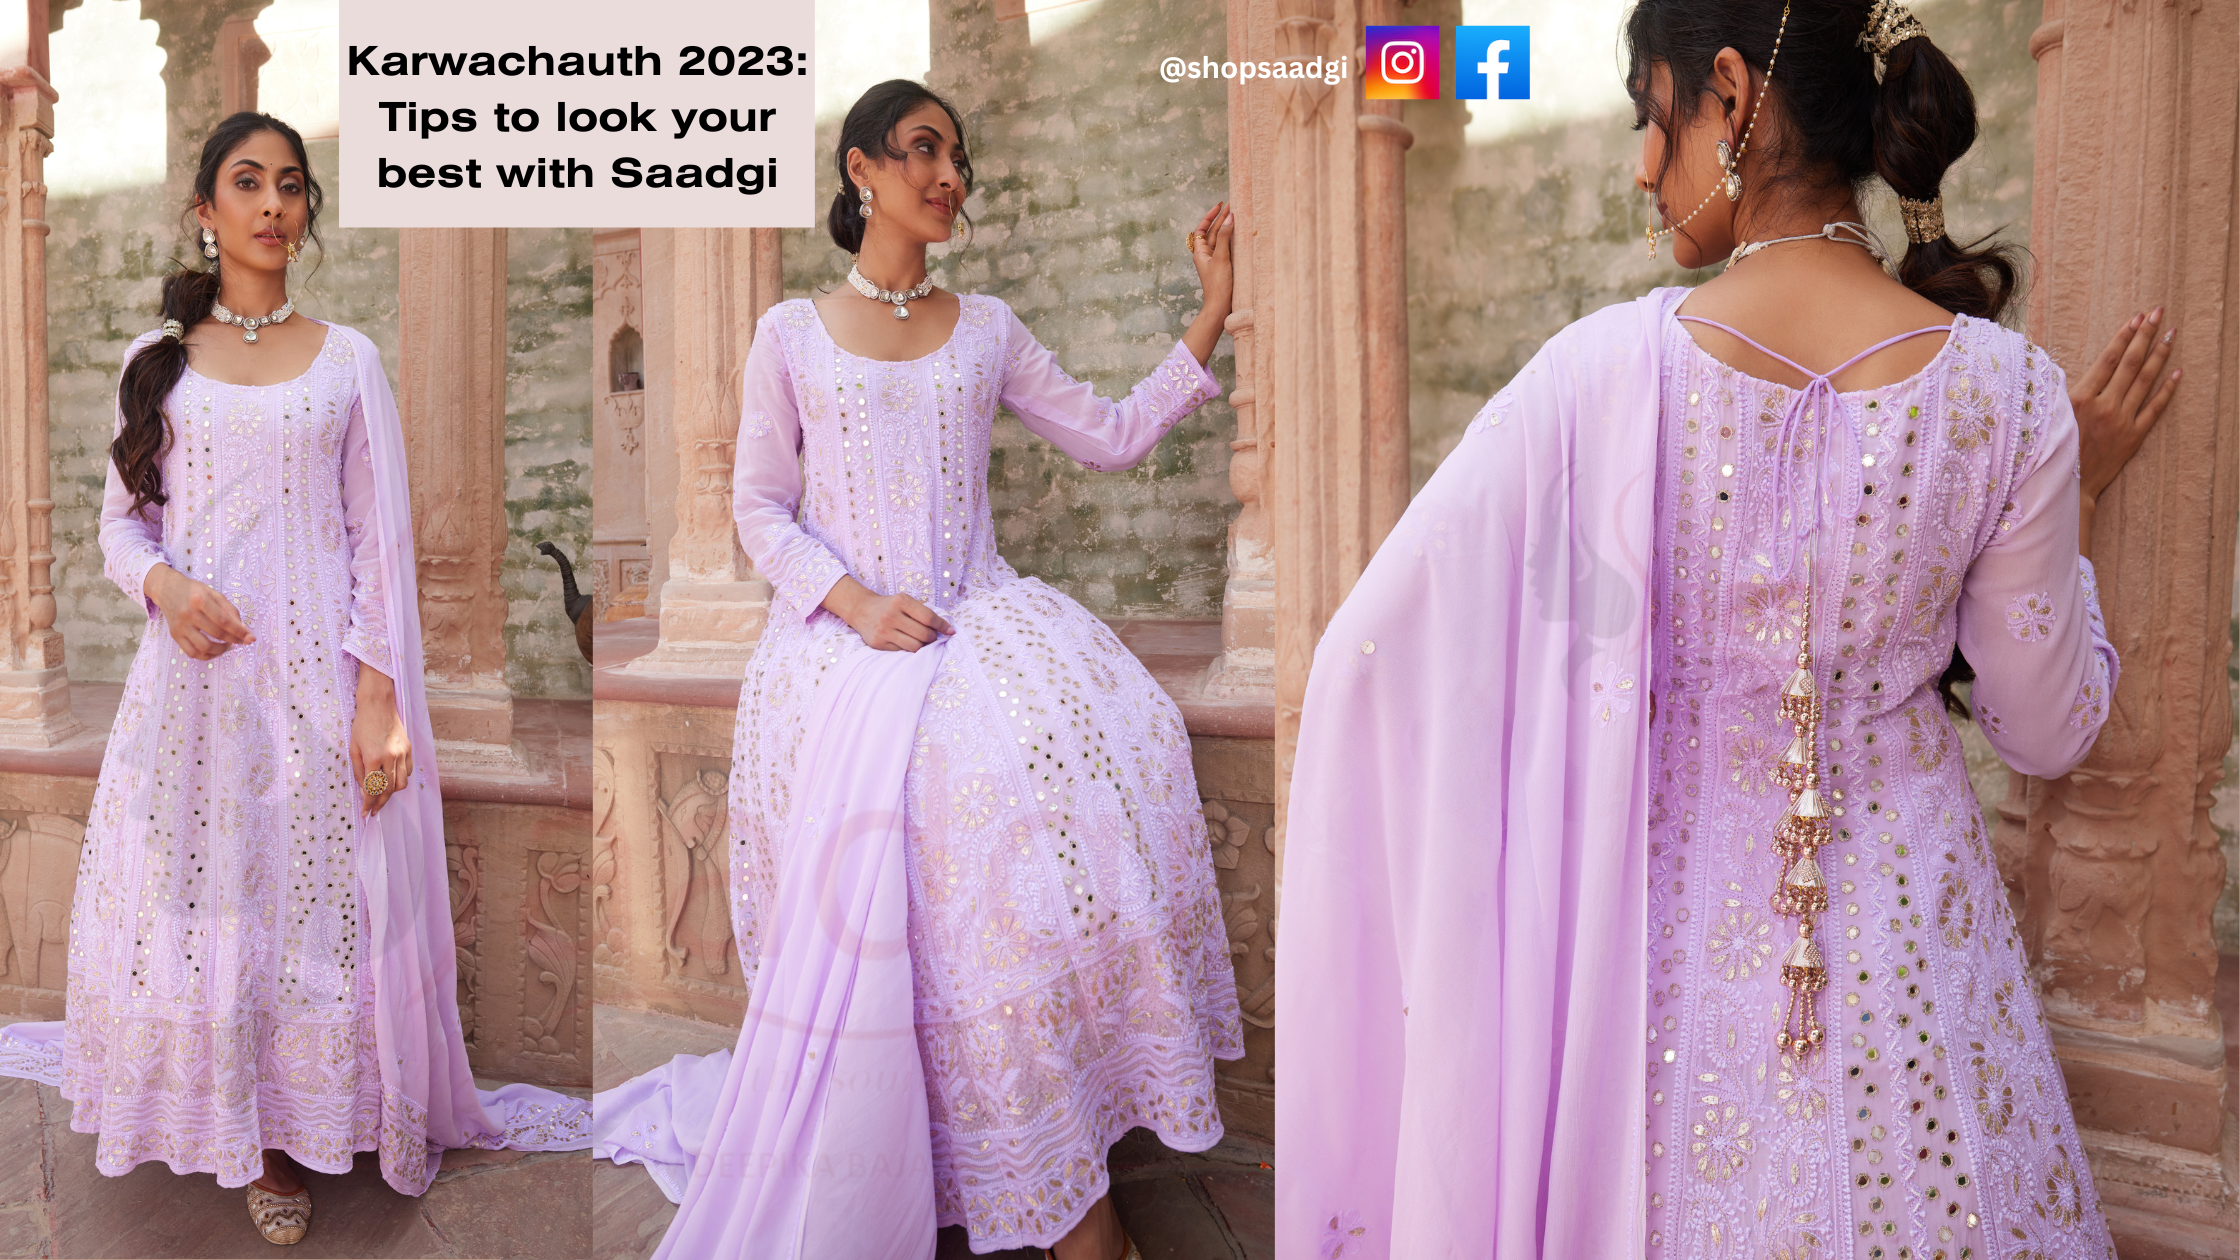 Karwachauth 2023: Tips to look your best with Saadgi